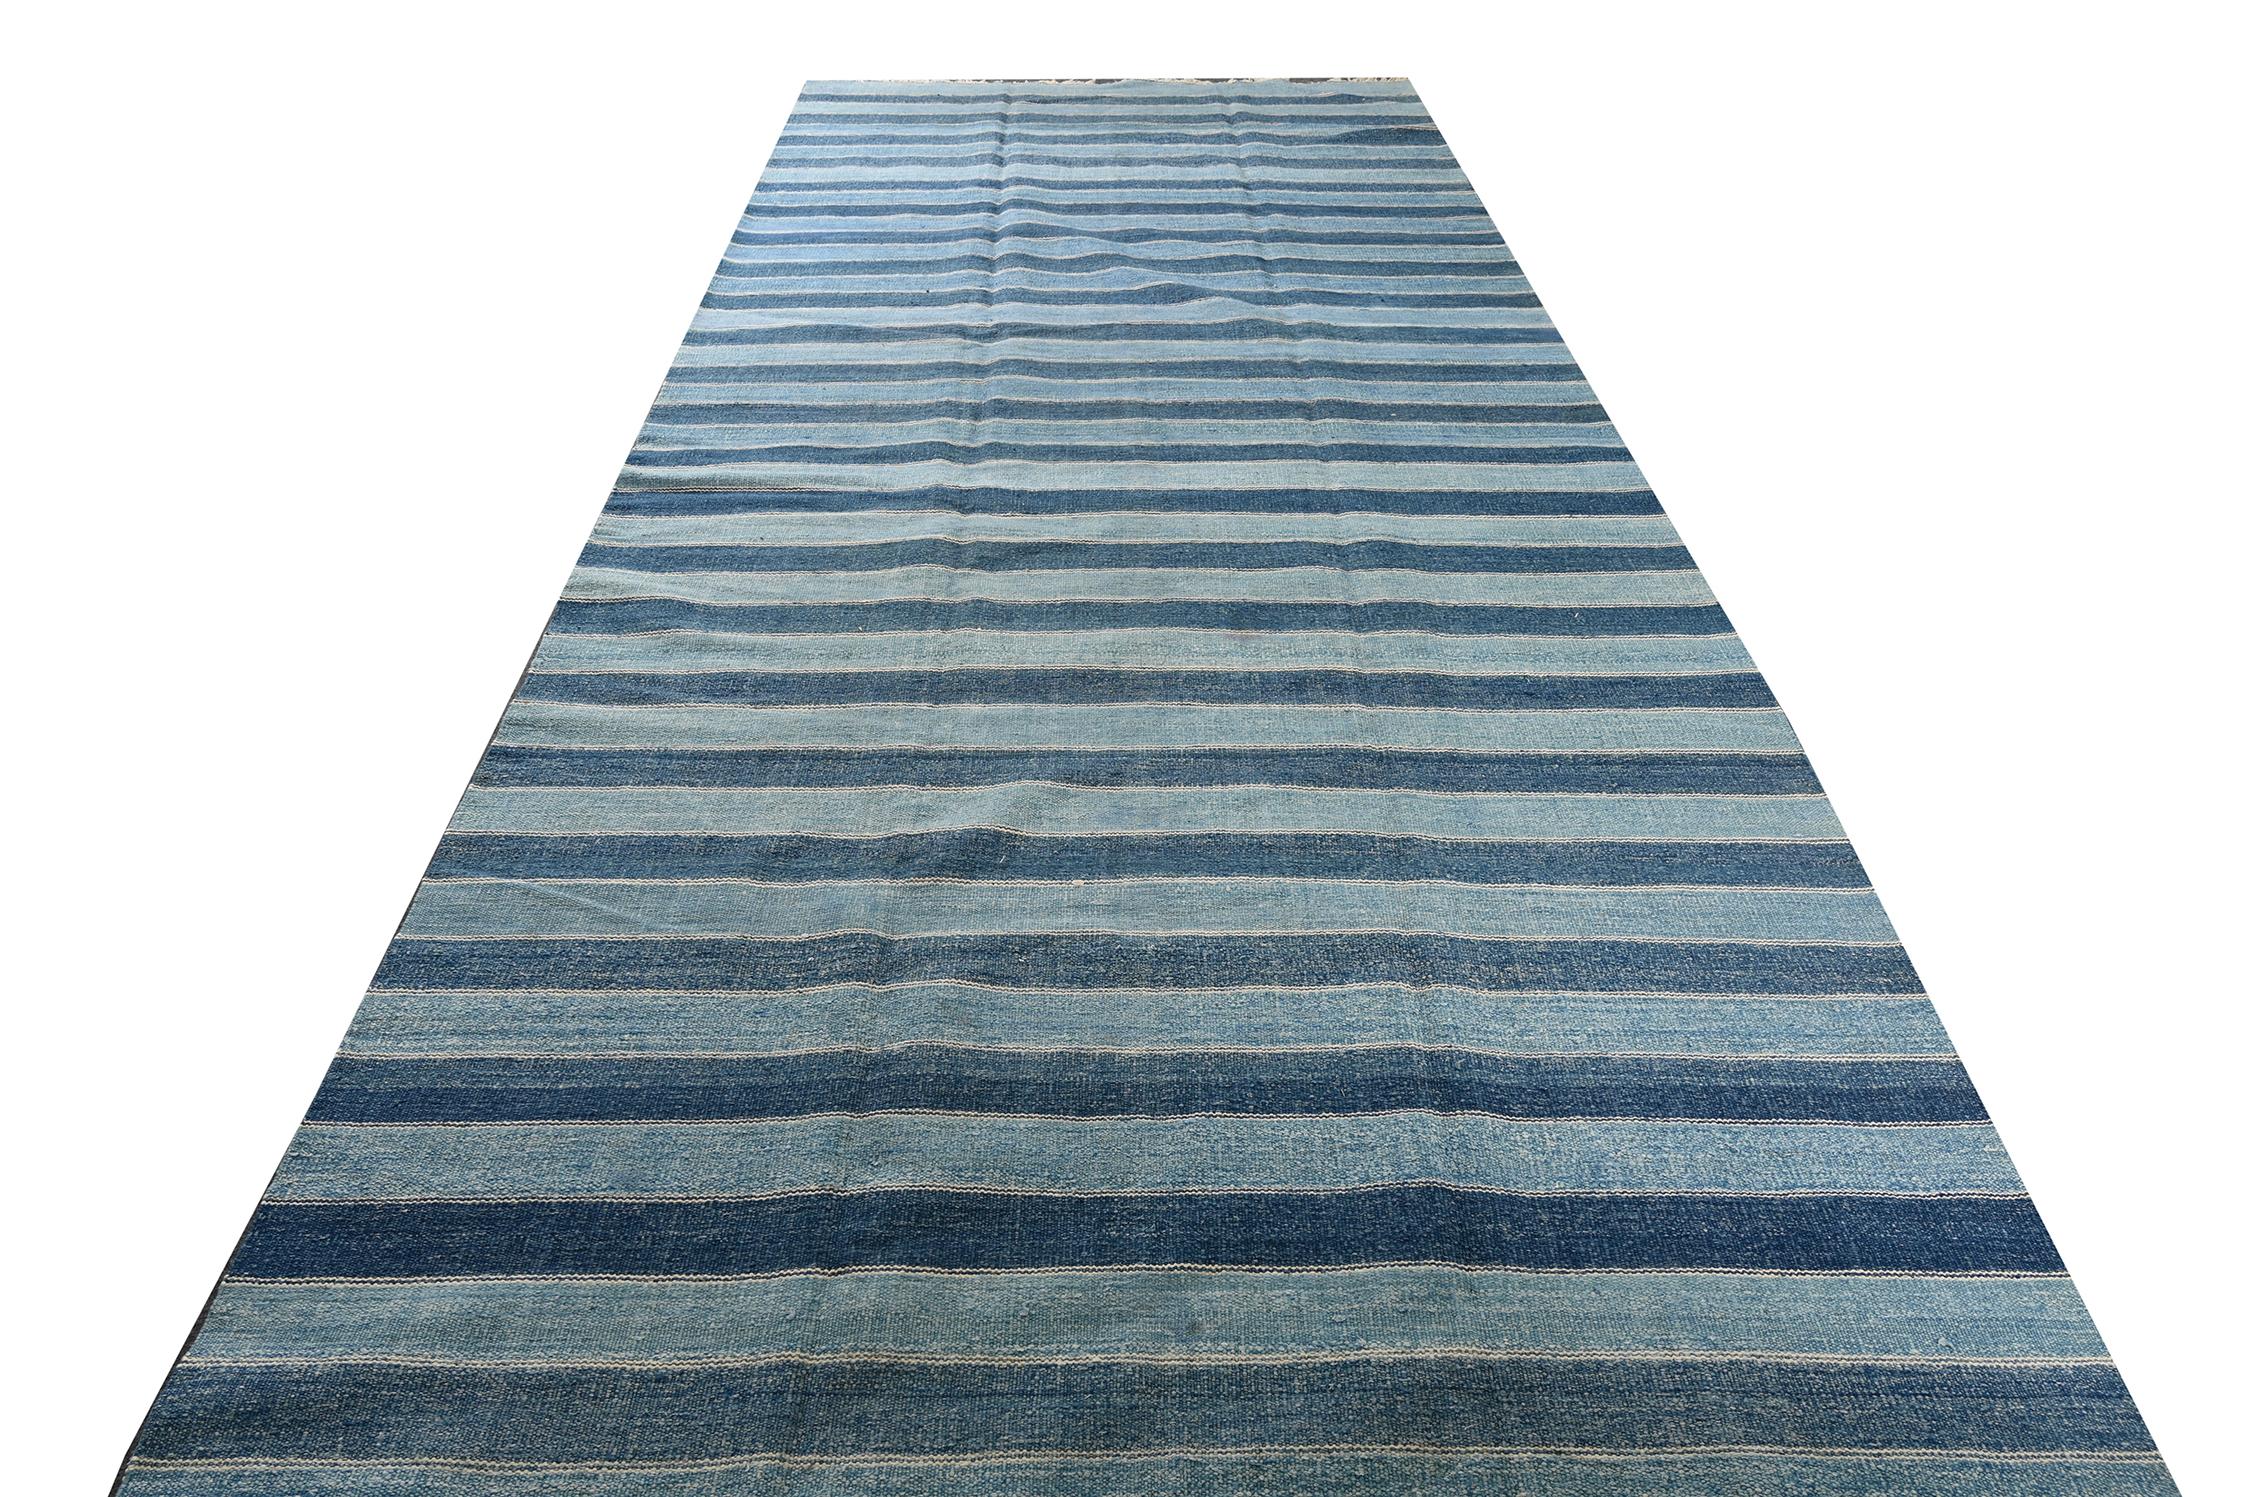 This vintage 6x23 Dhurrie is an exciting new entry in Rug & Kilim's esteemed flat weave collection. Handwoven in cotton, it originates from India circa 1950-1960. 

Further on the Design:

This flat weave prefers a simple series of stripes in